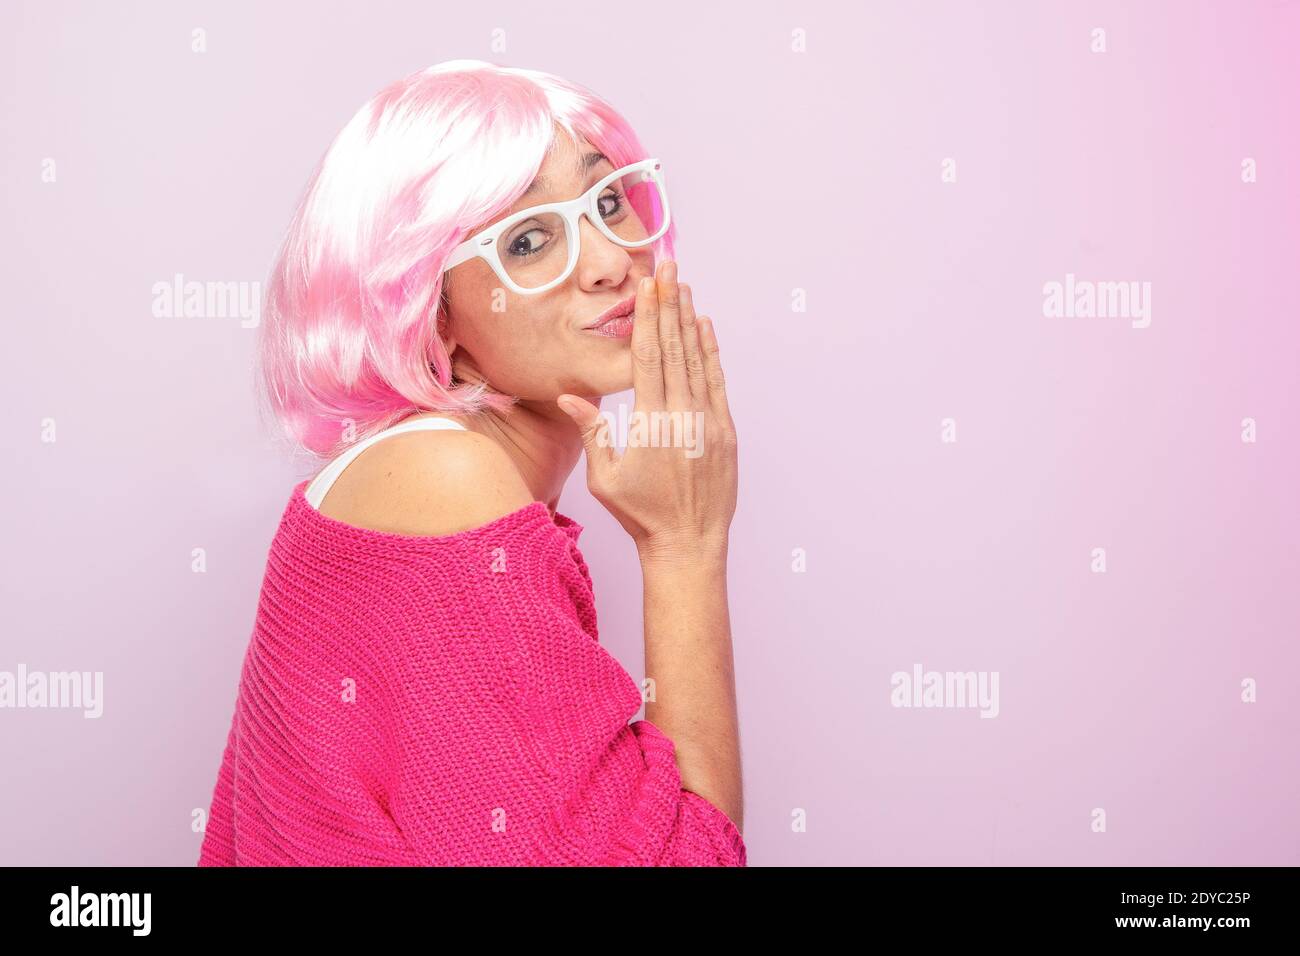 Caucasian woman with pink wig and sweater, wearing white glasses, posing funny at the photo studio. Funny expressive women and colorful portrait conce Stock Photo